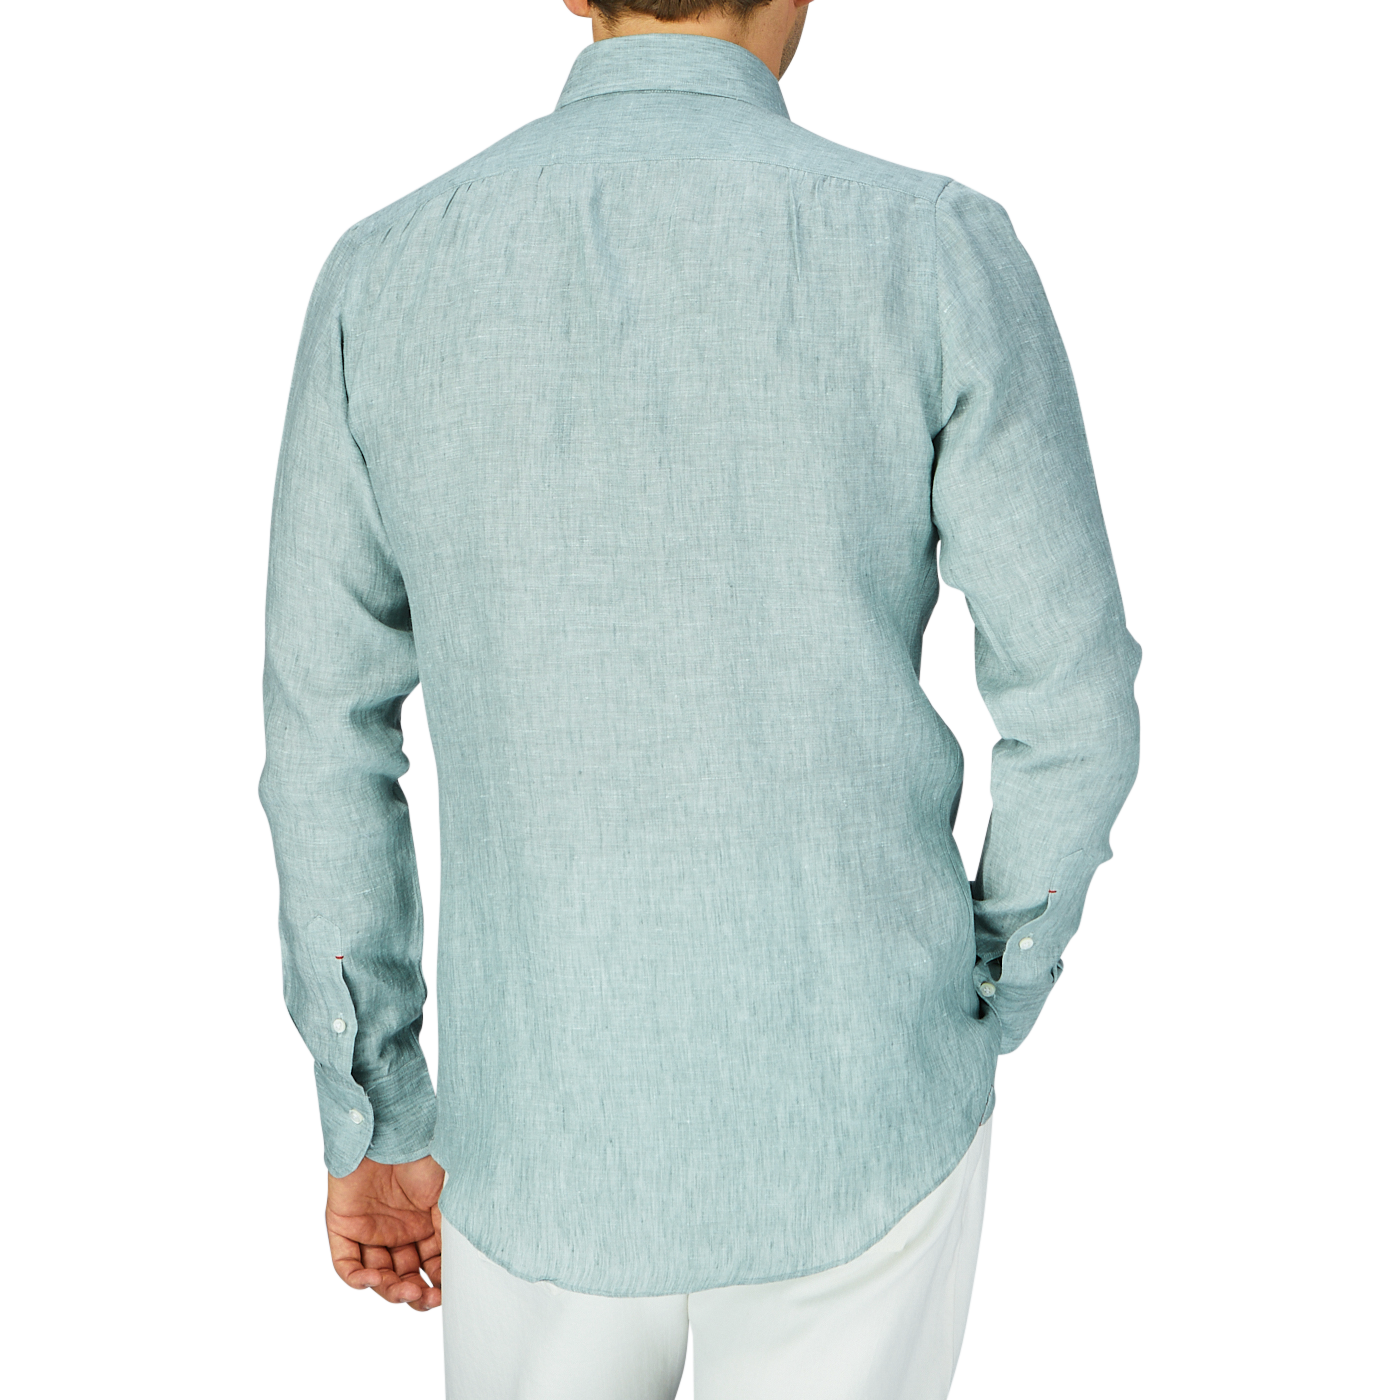 A person standing with their back to the camera, wearing a Teal Green Organic Linen BD Slim Shirt by Italian shirtmaker Mazzarelli and white pants.